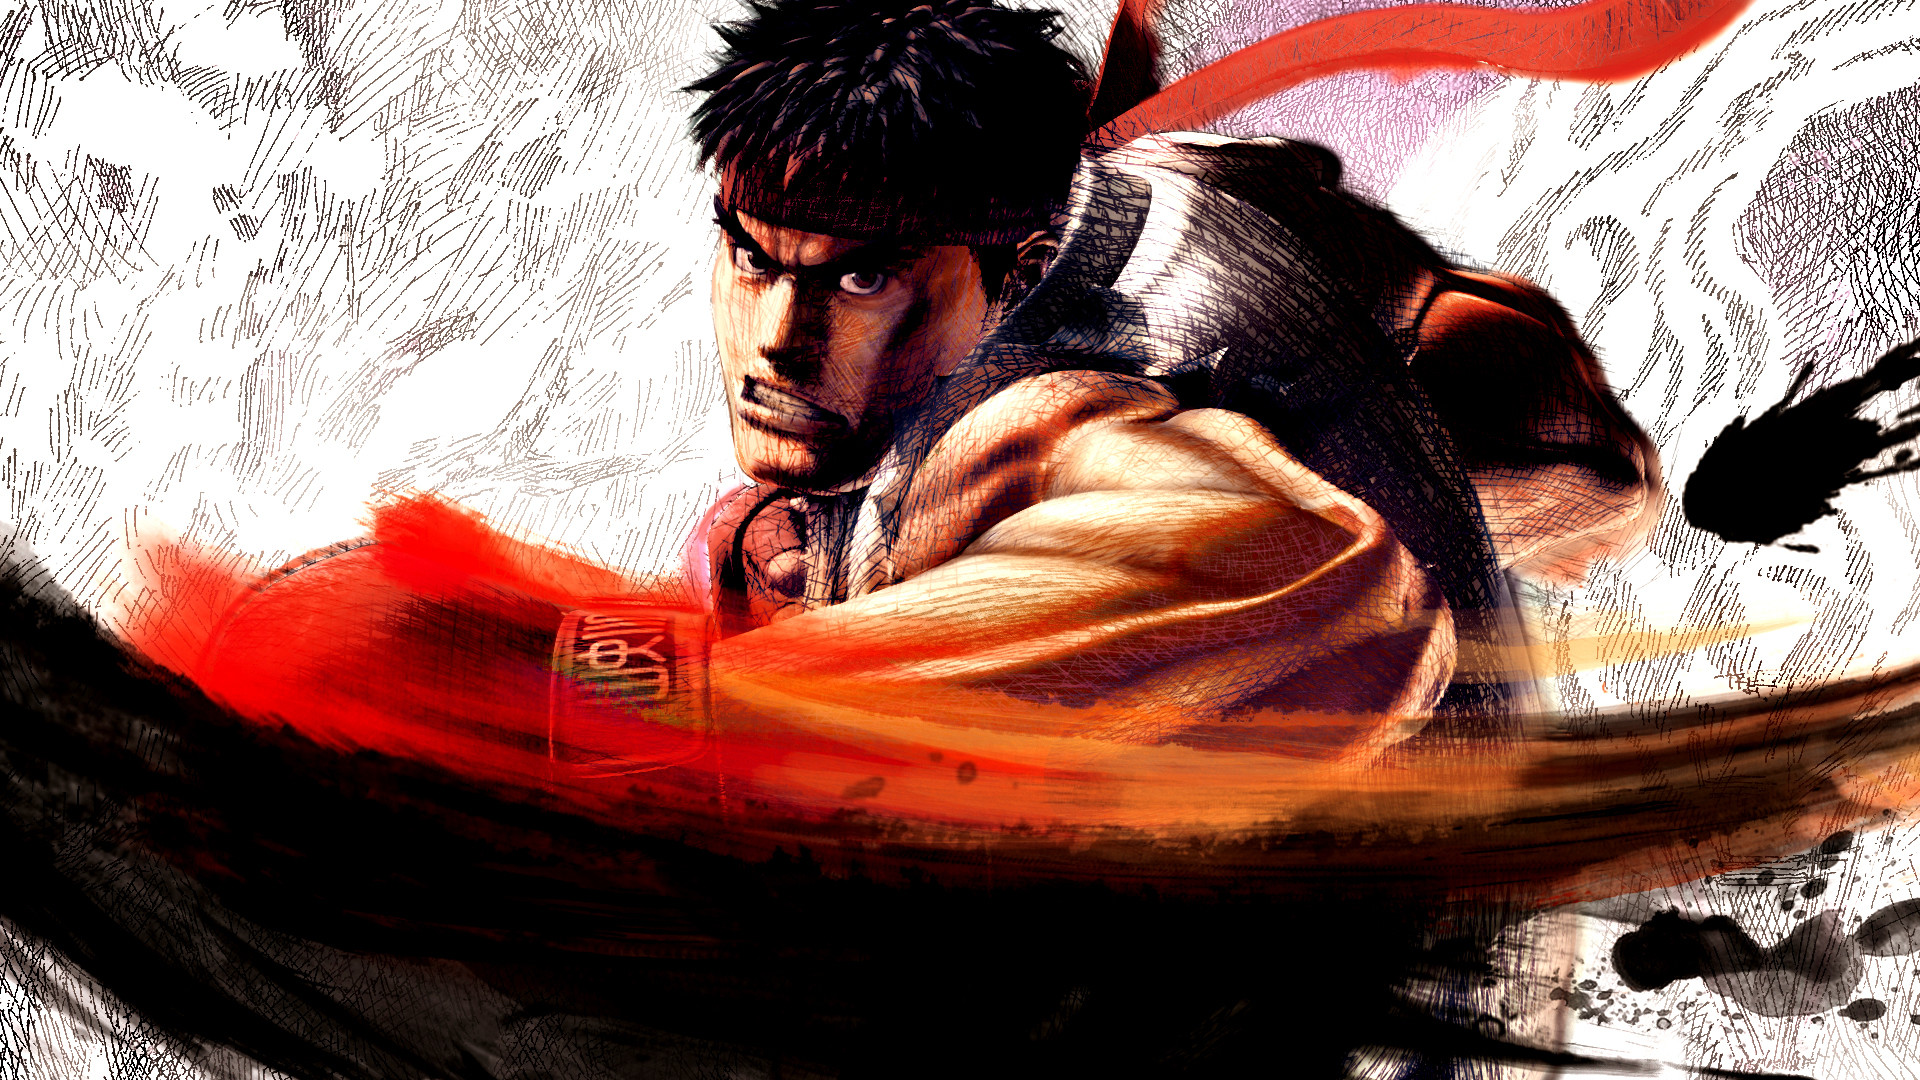 1920x1080 Street Fighter Photo Download Free.